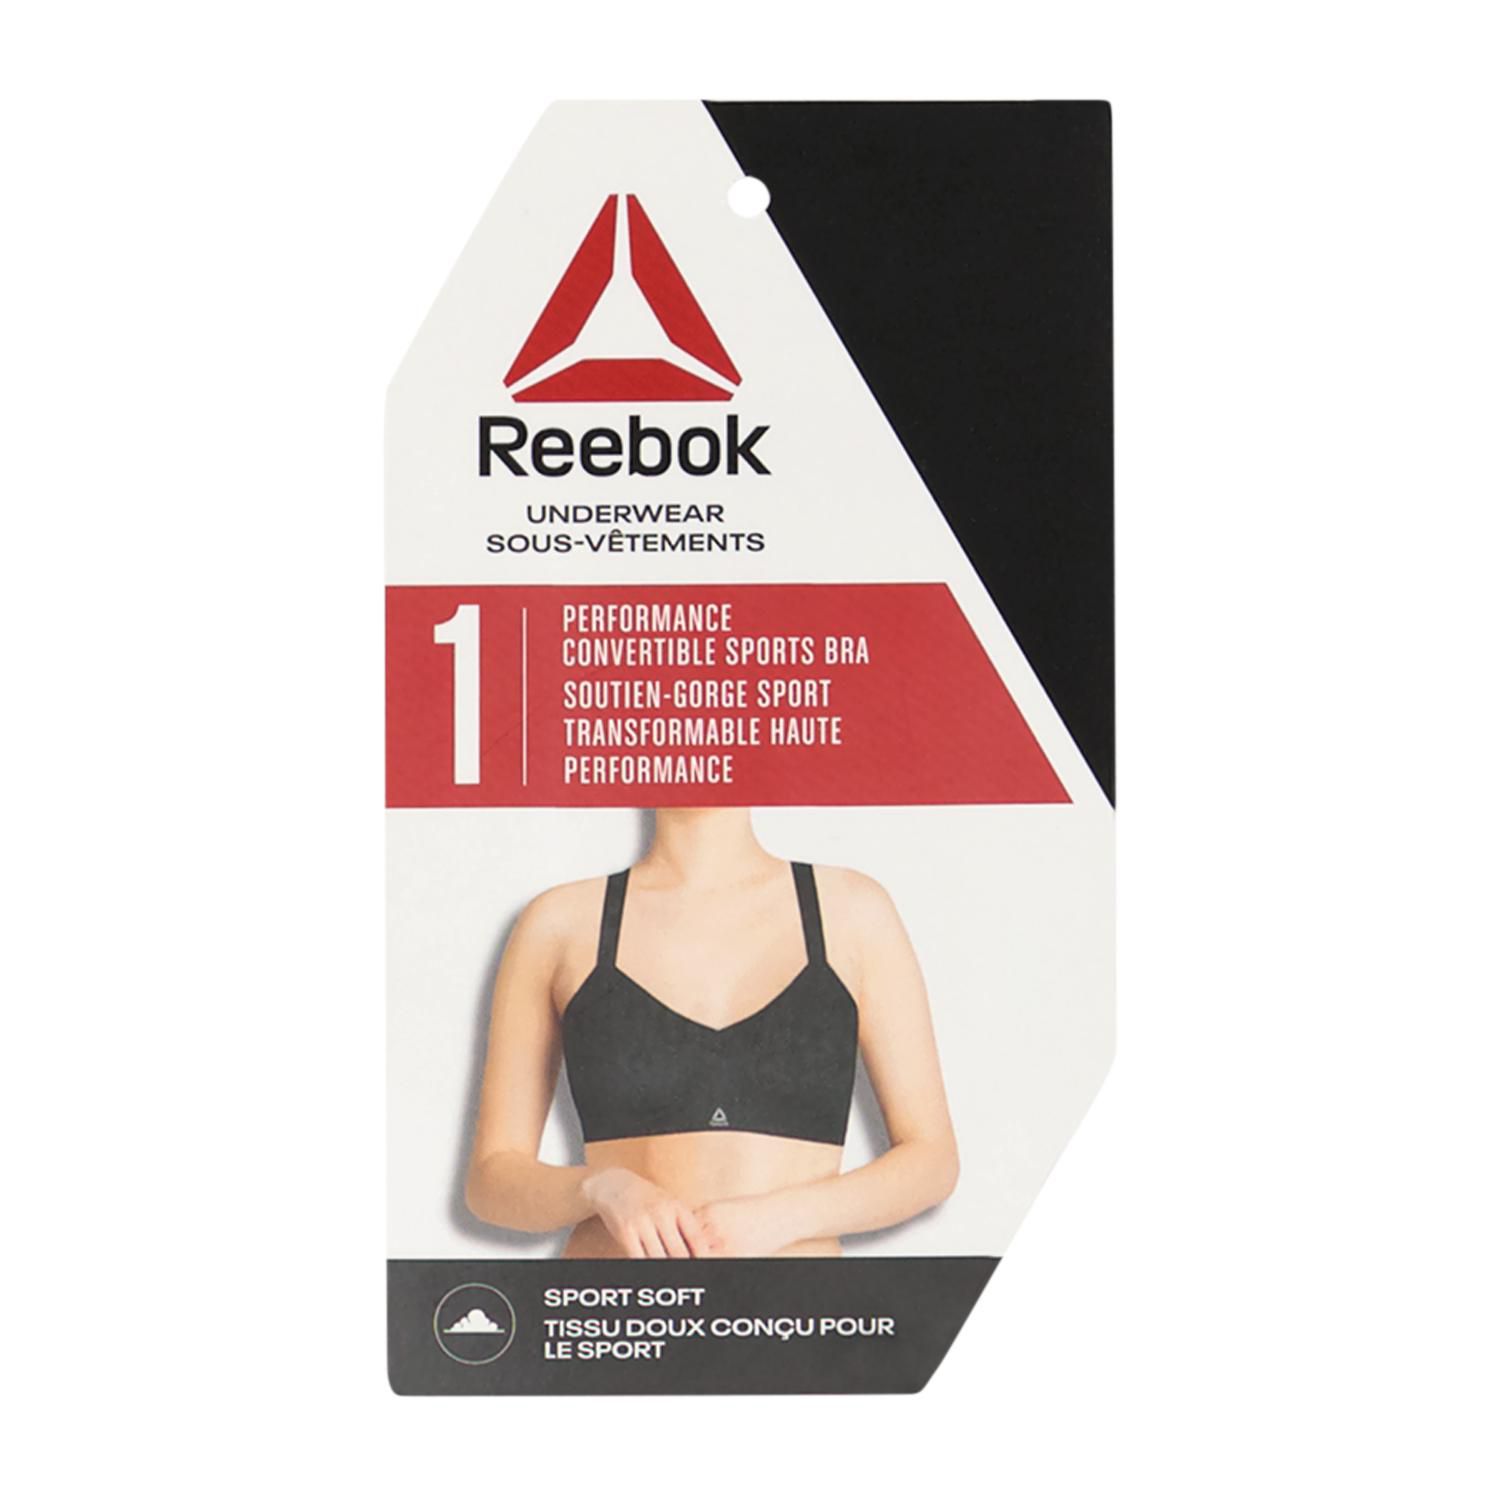 Reebok Men's Womens Crop Top Bra in Black Polyester Fabric and Multicolour  Branding | Moisture Wicking & Removable Pads Sports